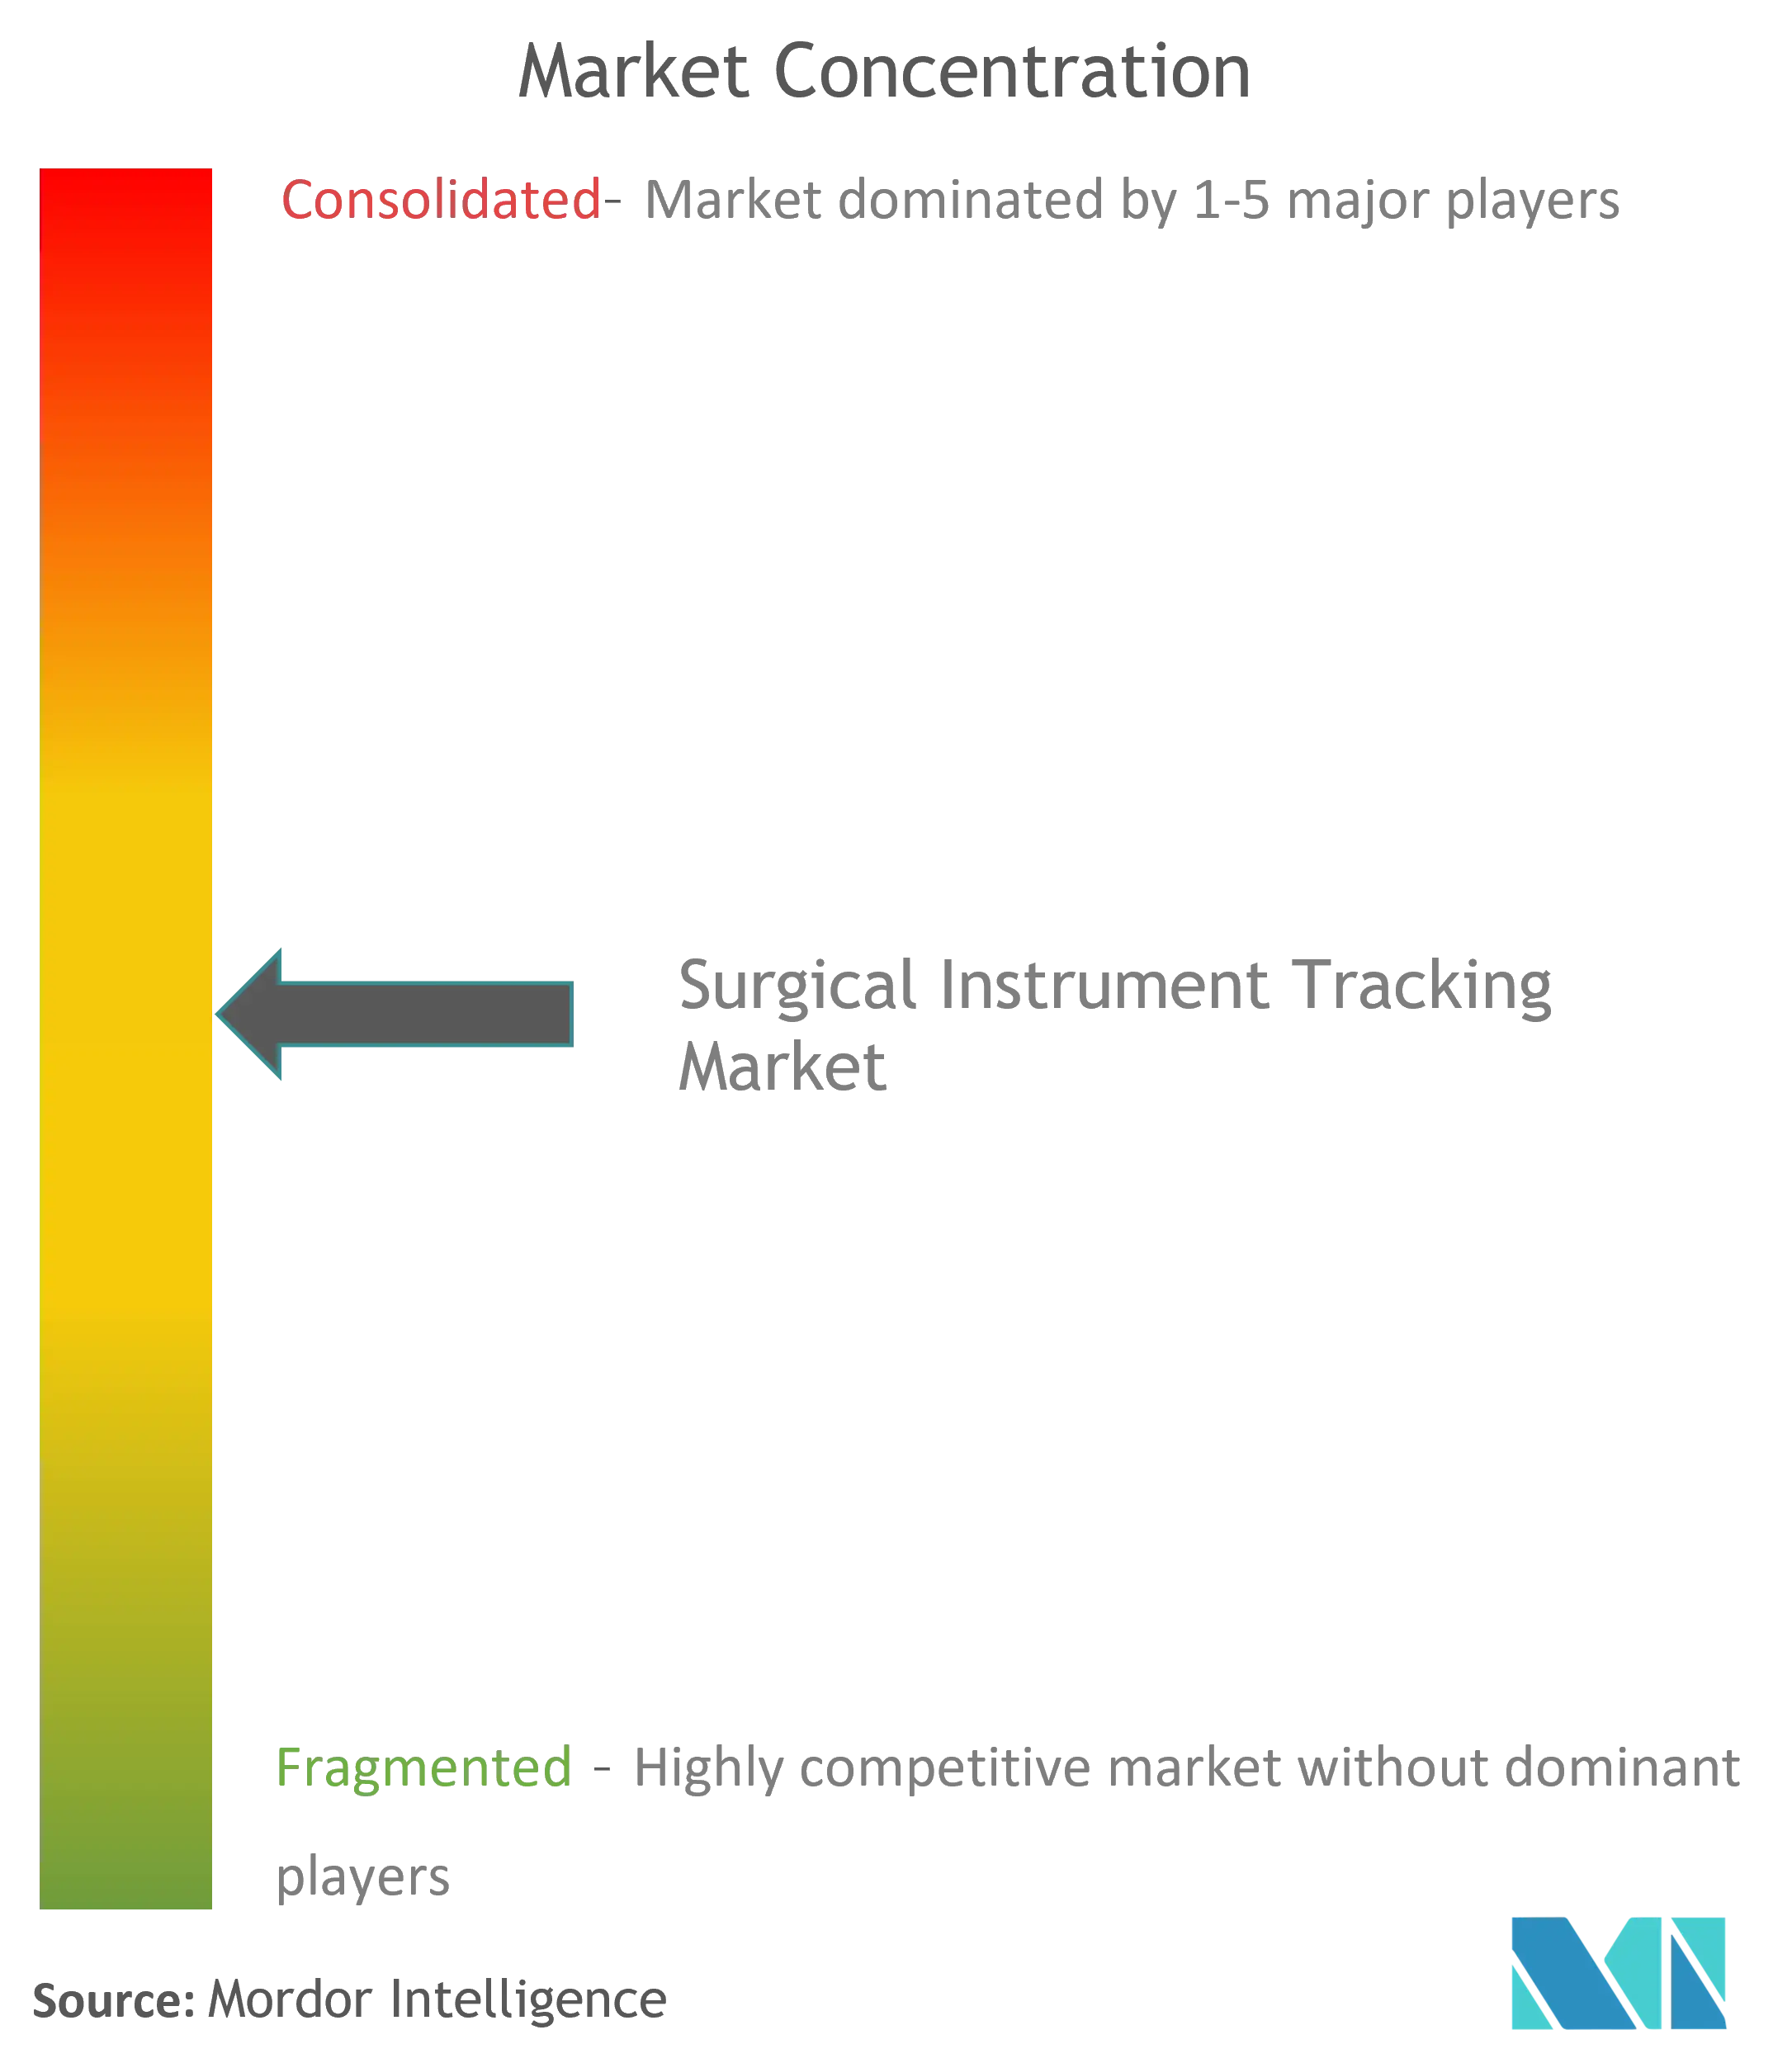 Surgical Instrument Tracking Market Concentration